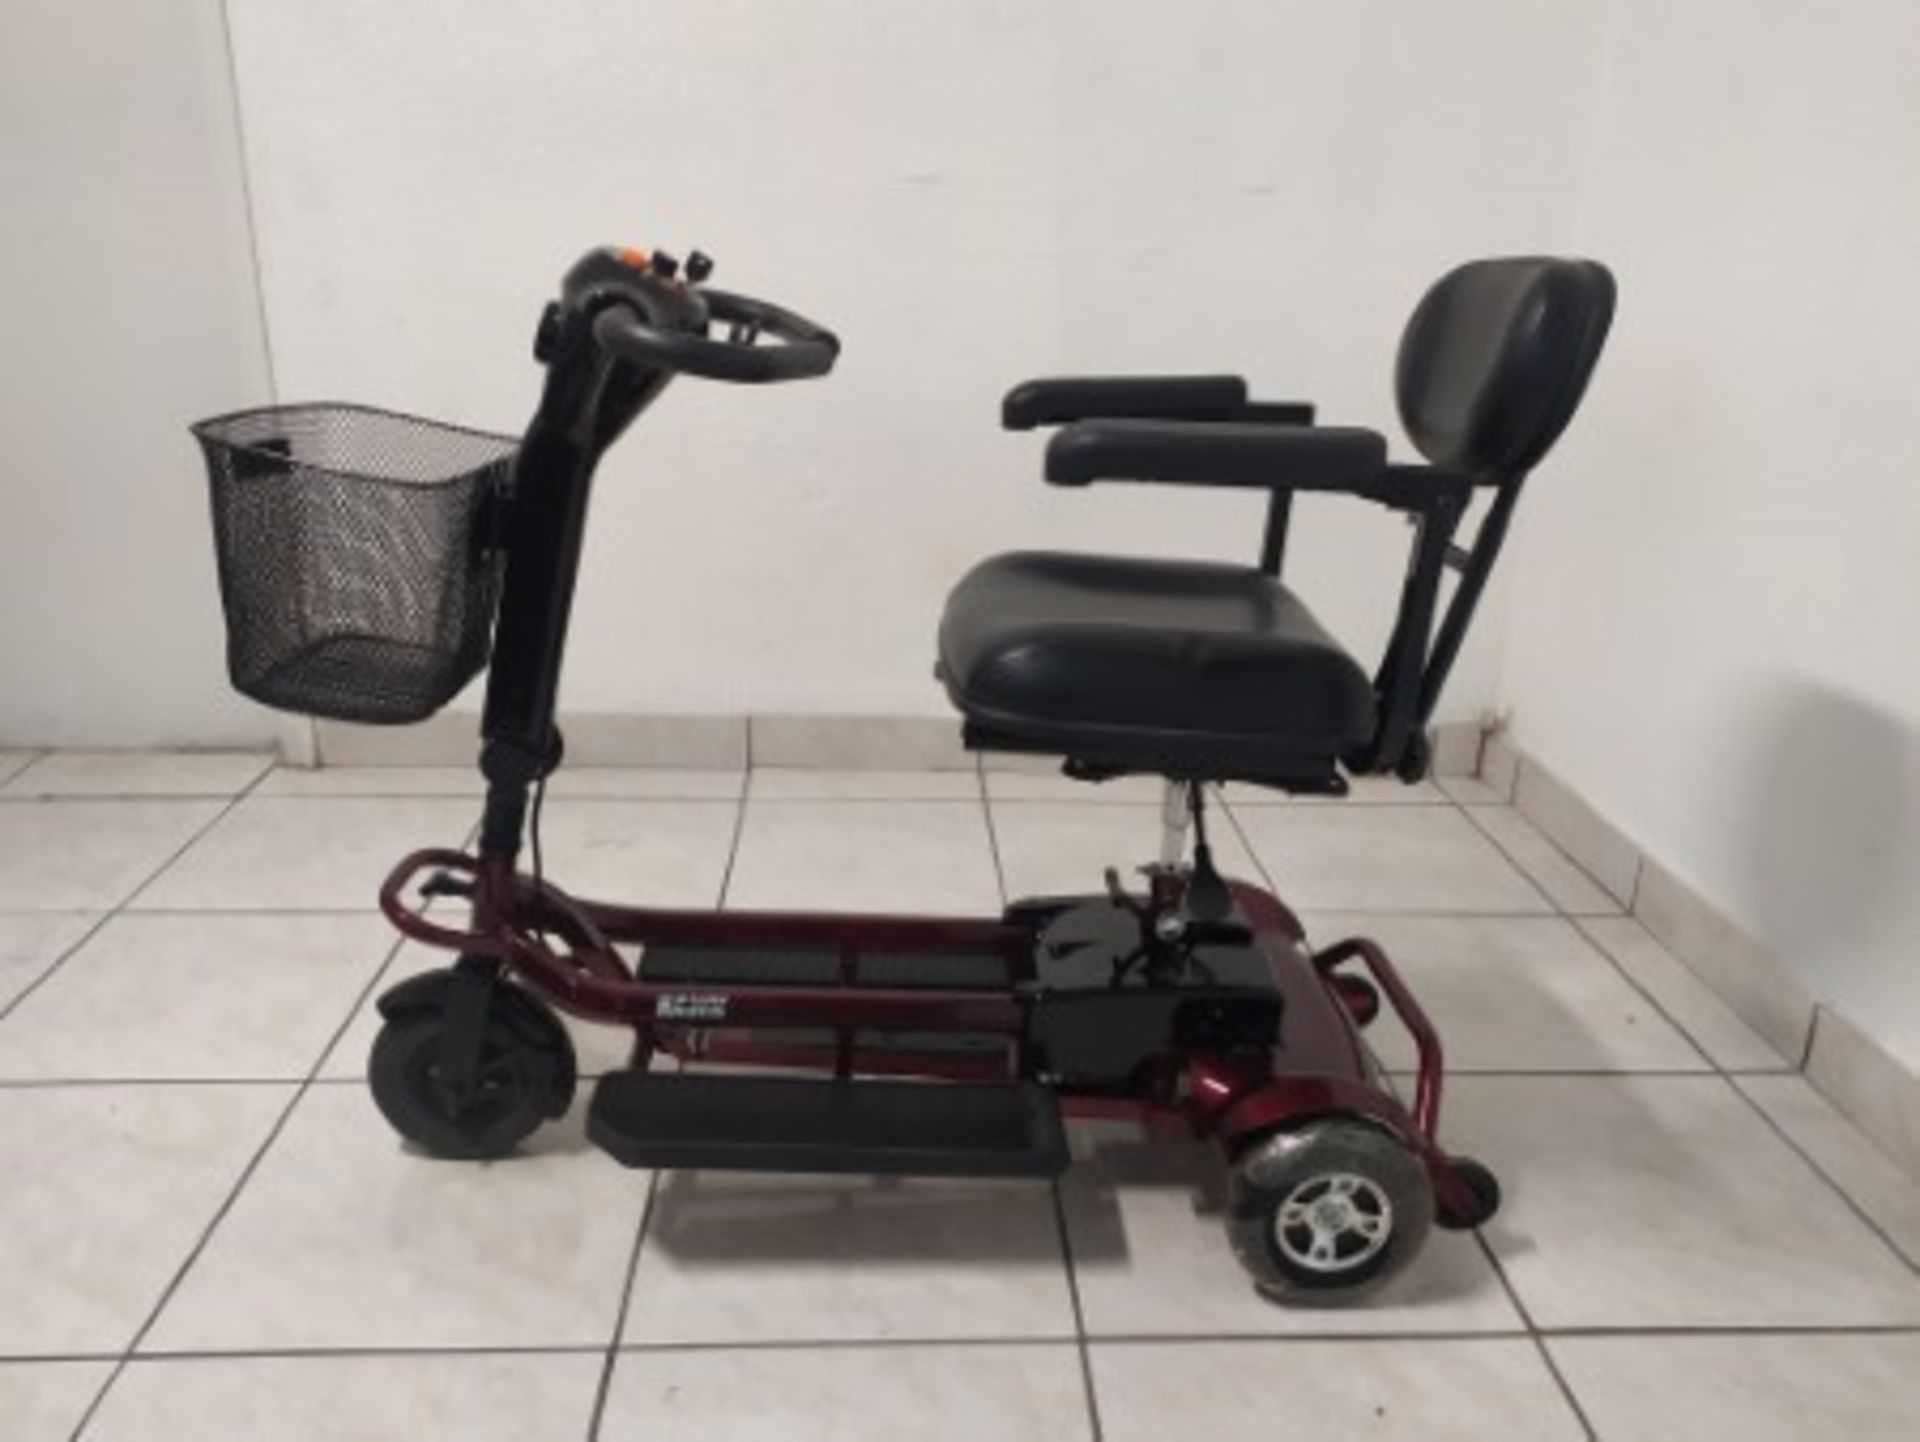 2012 DRIVE HAWK 3-WHEEL SCOOTER WITH BASKET - RED - 250LB CAPACITY - SERIAL No. 2A07030128 (NO CHARG - Image 2 of 5